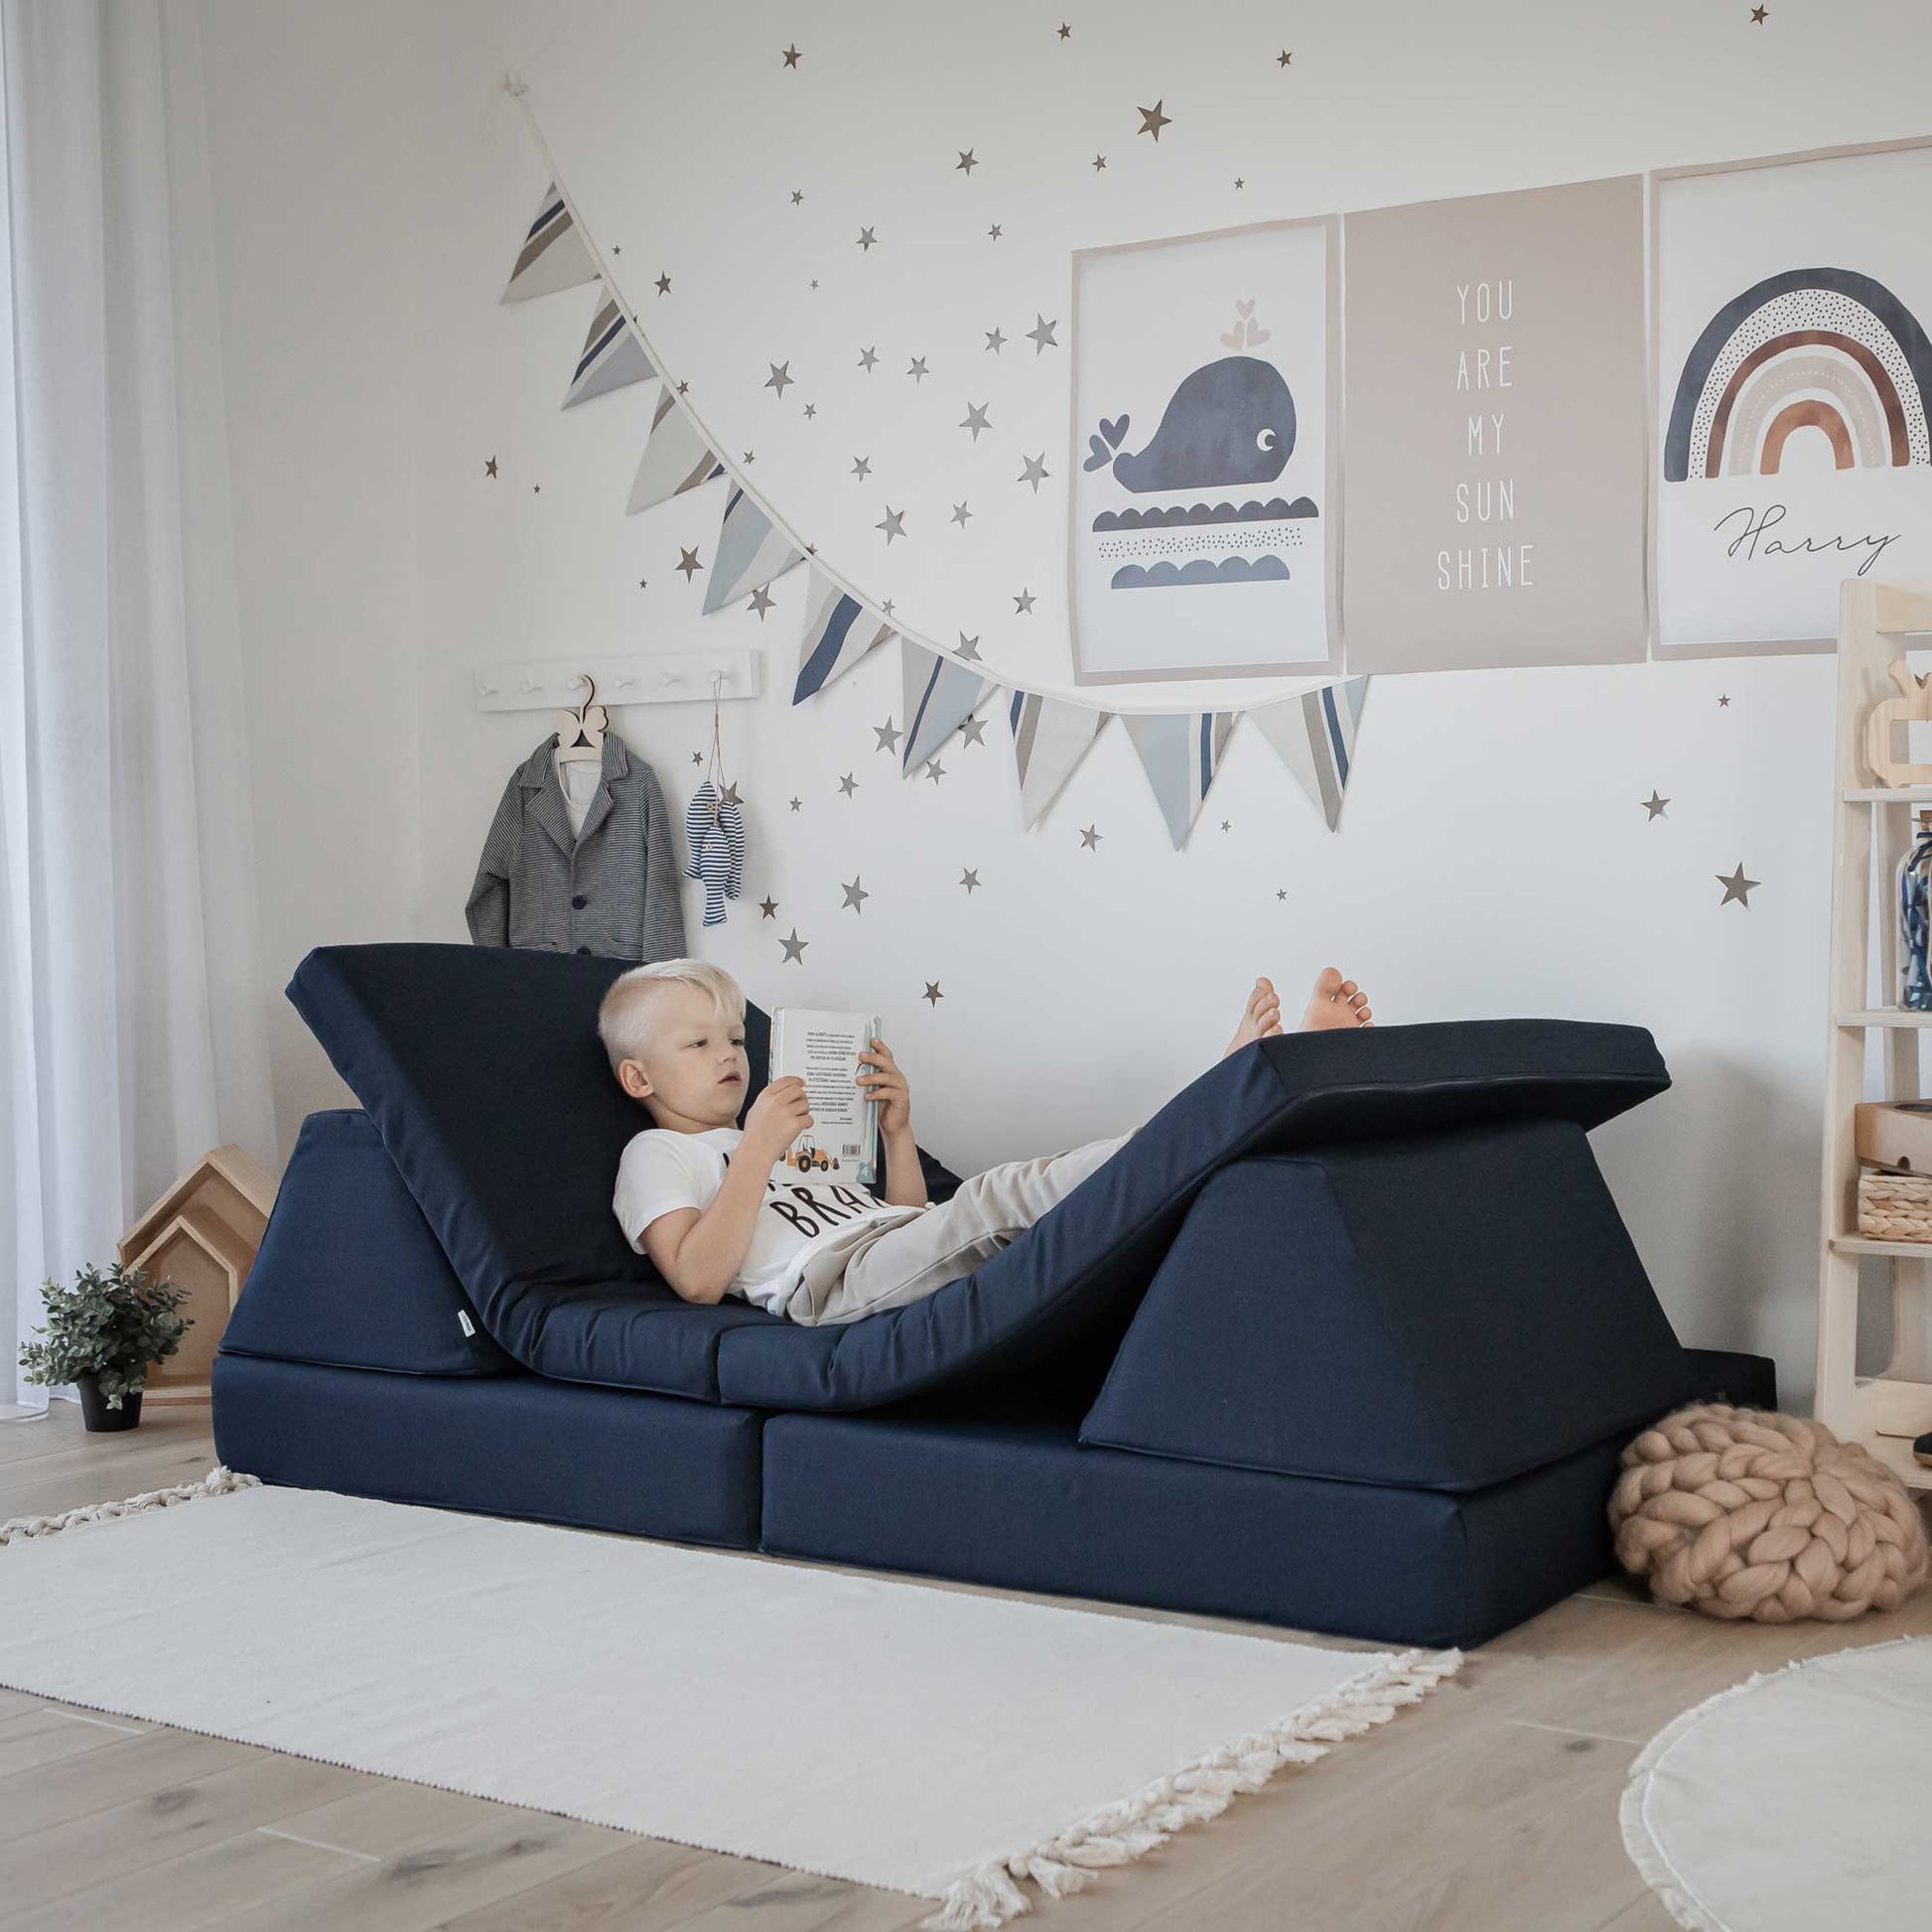 A child is laying on a blue activity play couch set in a Montessori-inspired child's room from Sweet HOME from wood.